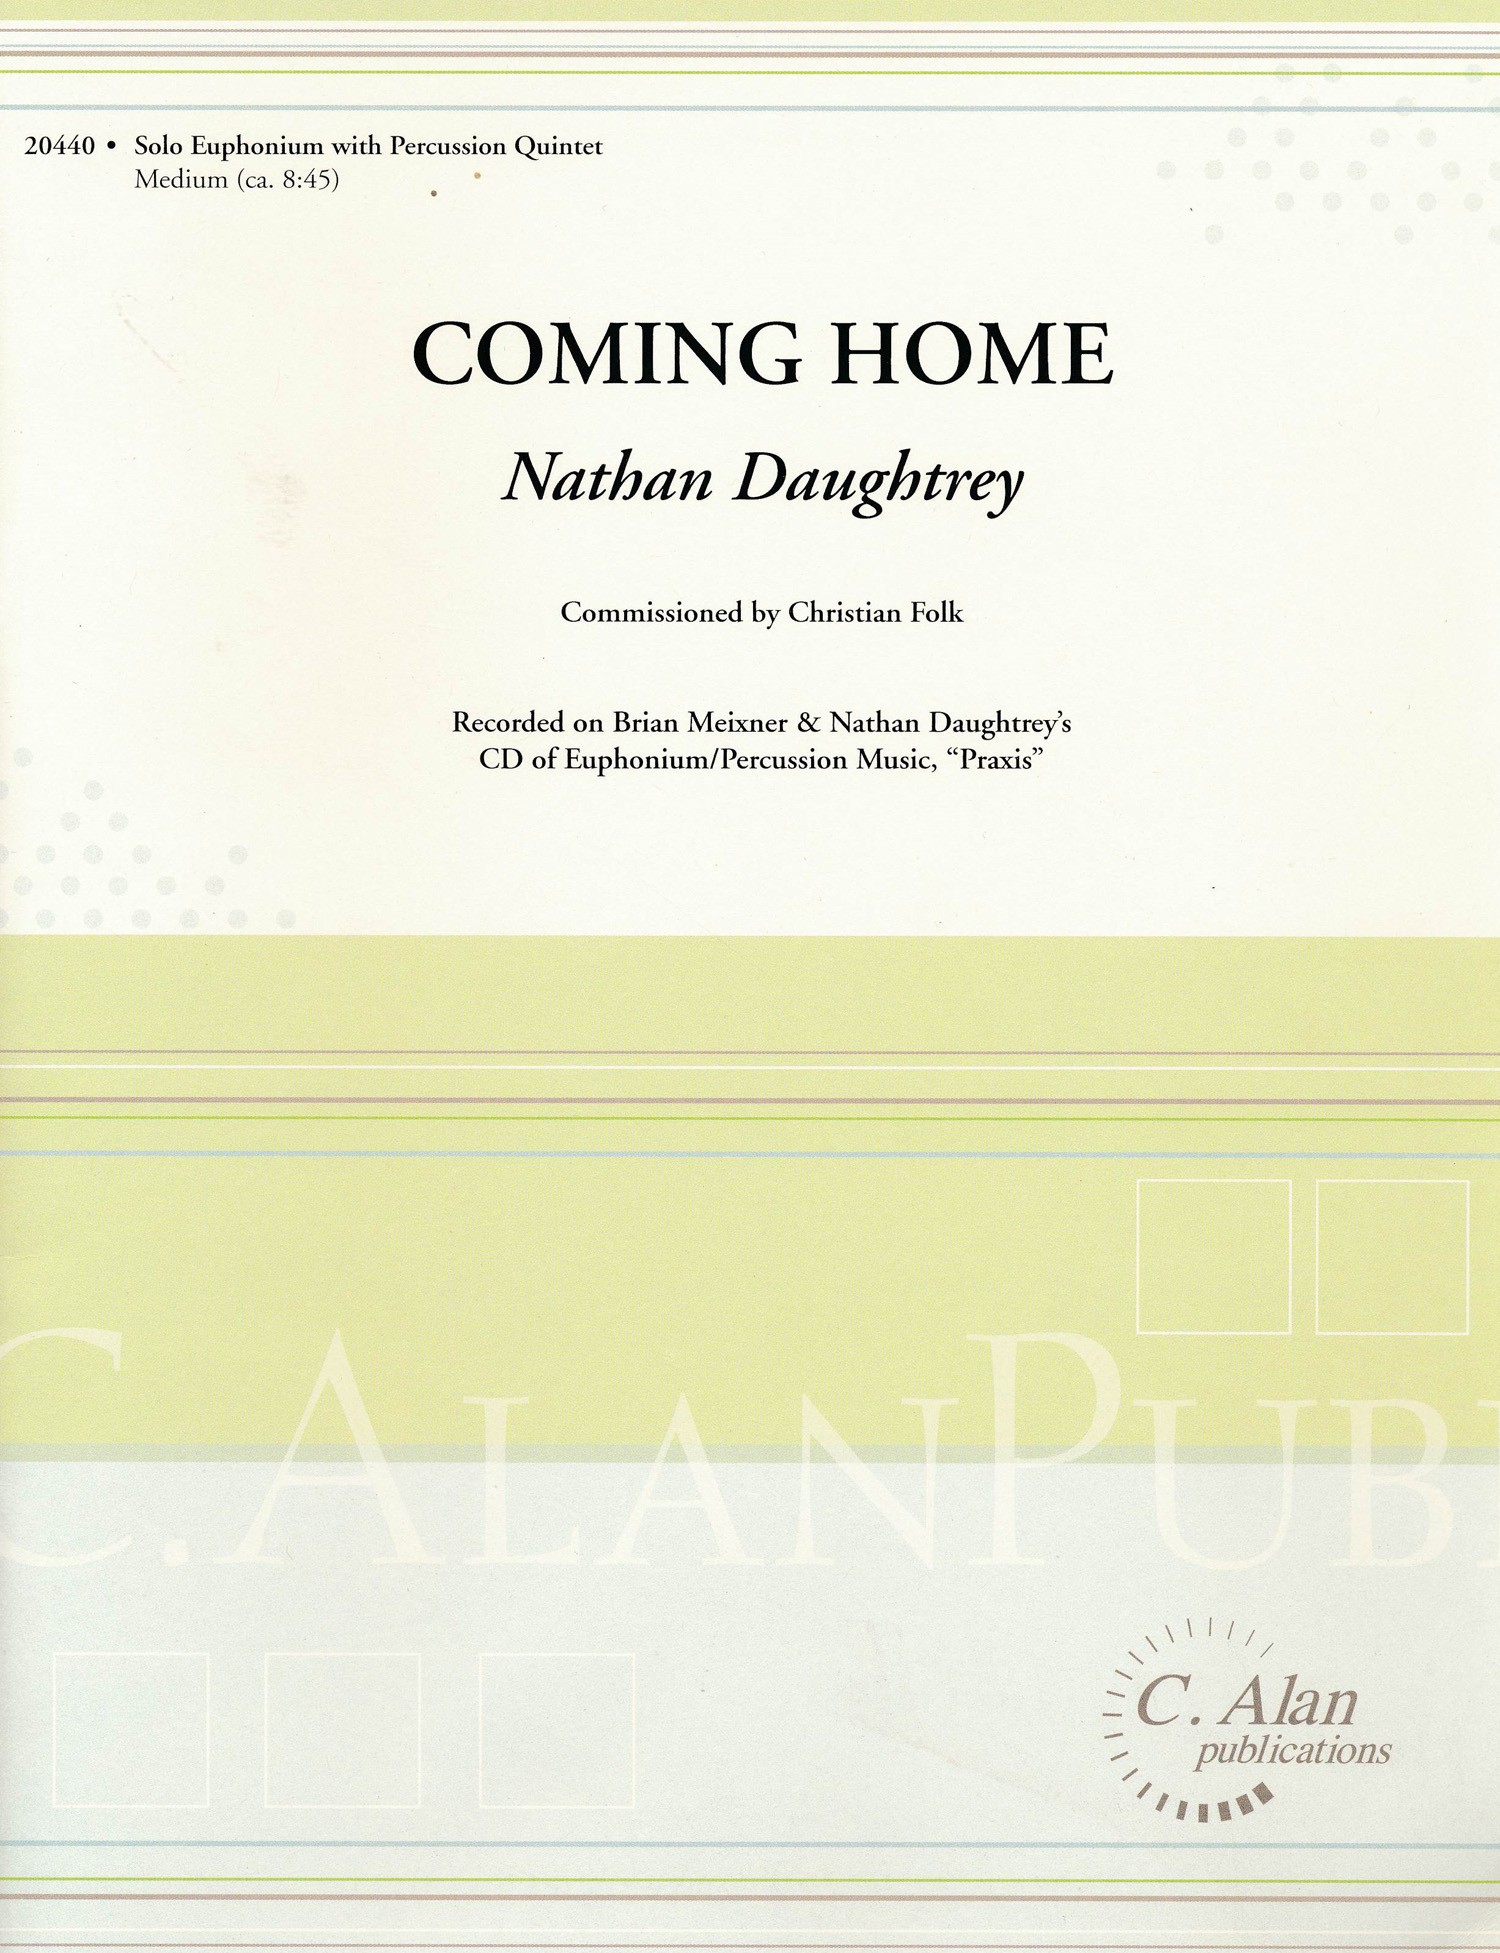 Coming Home for solo euphonium with percussion quintet by Nathan Daughtrey